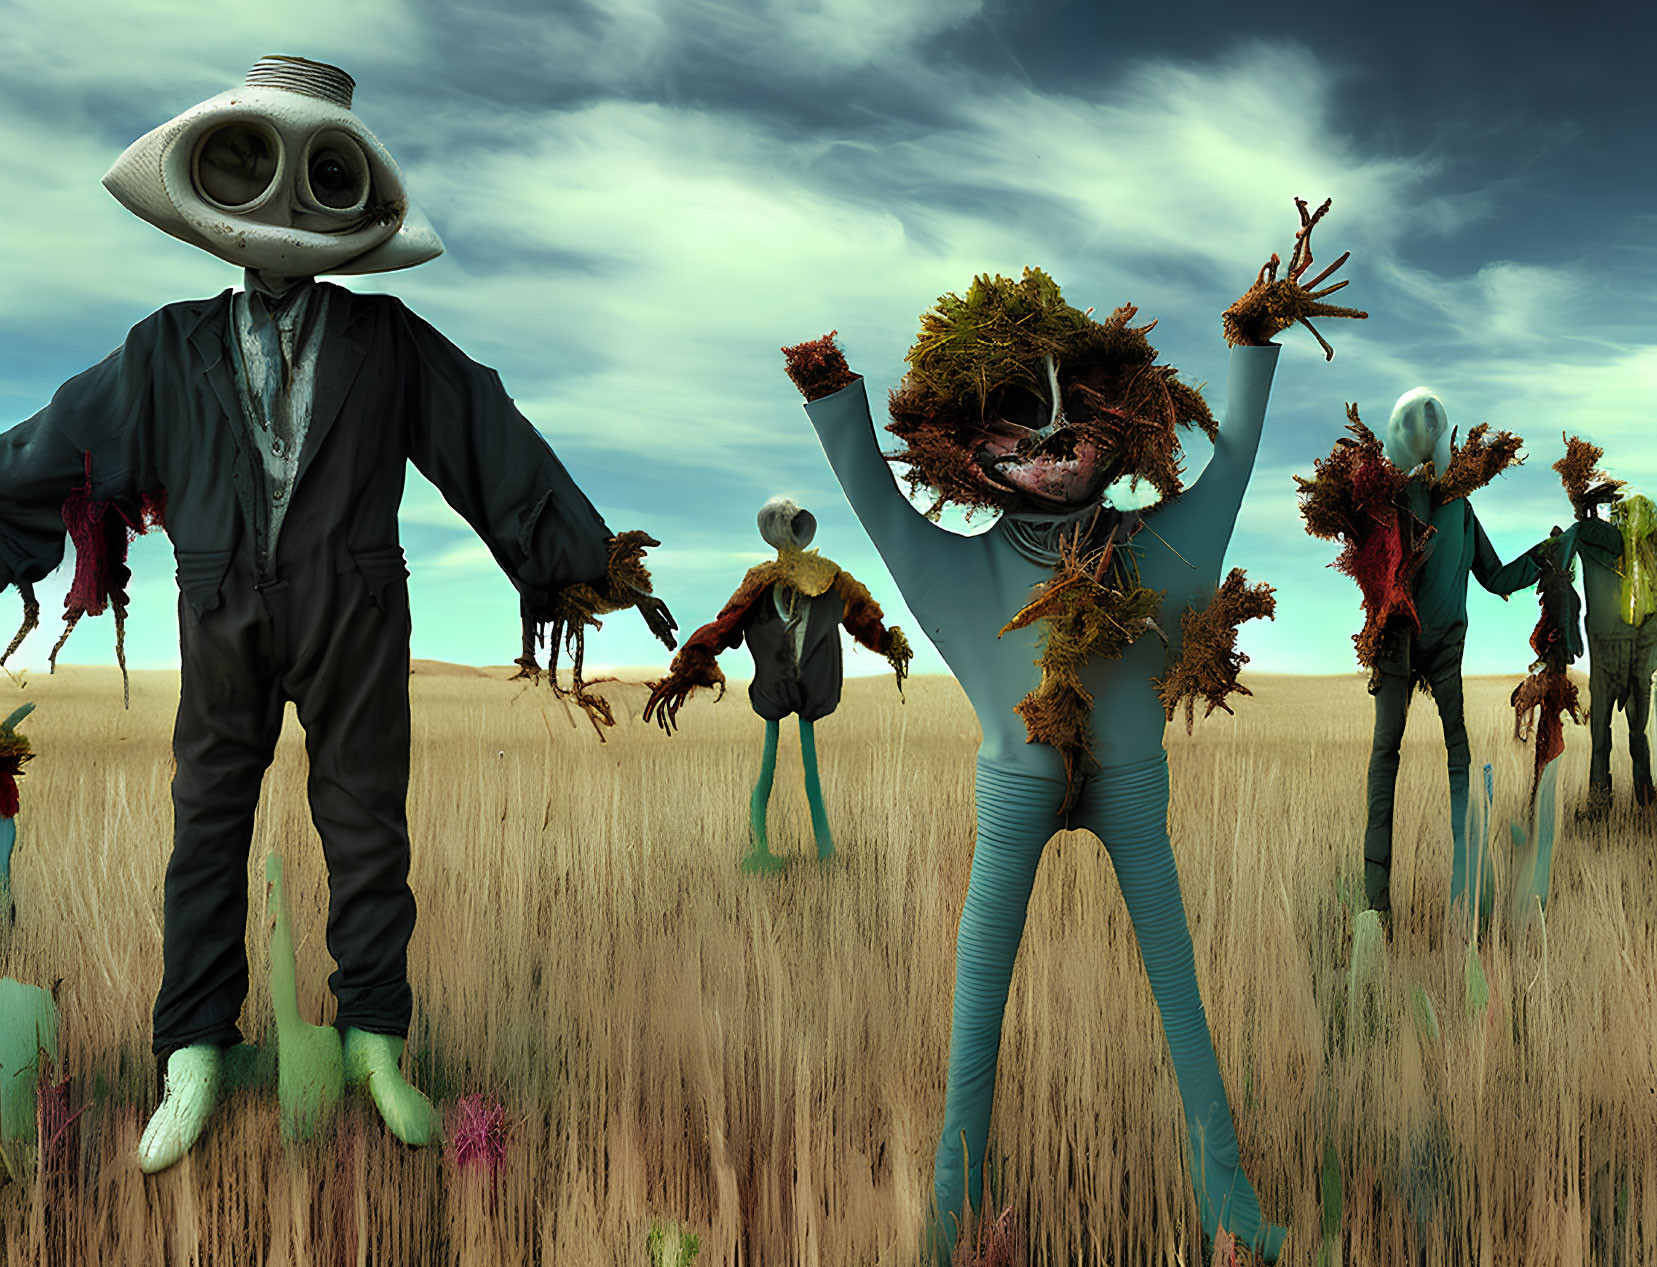 Whimsical scarecrows with alien heads in surreal landscape